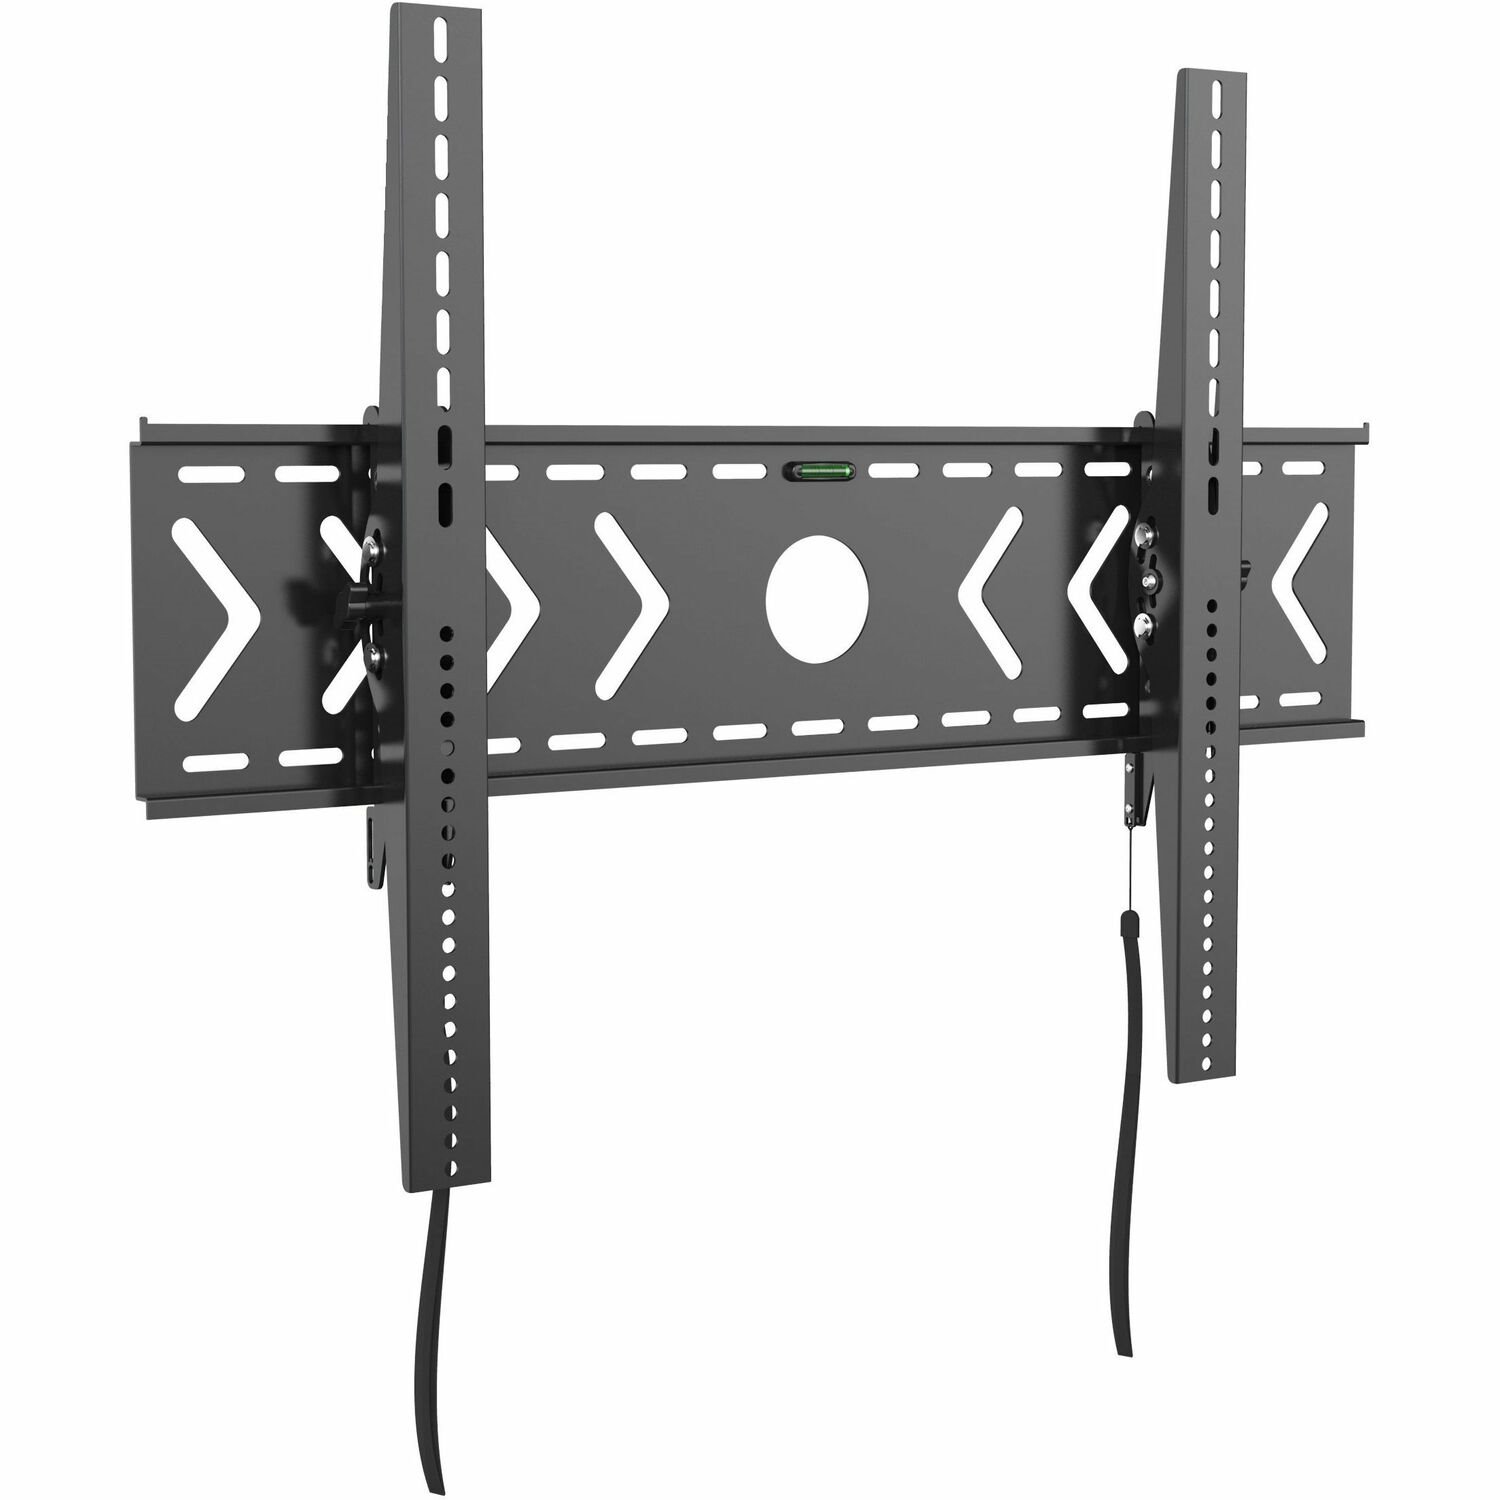 Amer Mounts - Heavy Duty Low Profile Tilting Flat Panel Wall Mount for 50-100 Inch Displays 250lbs Max Weight - BIGASSMOUNT250T